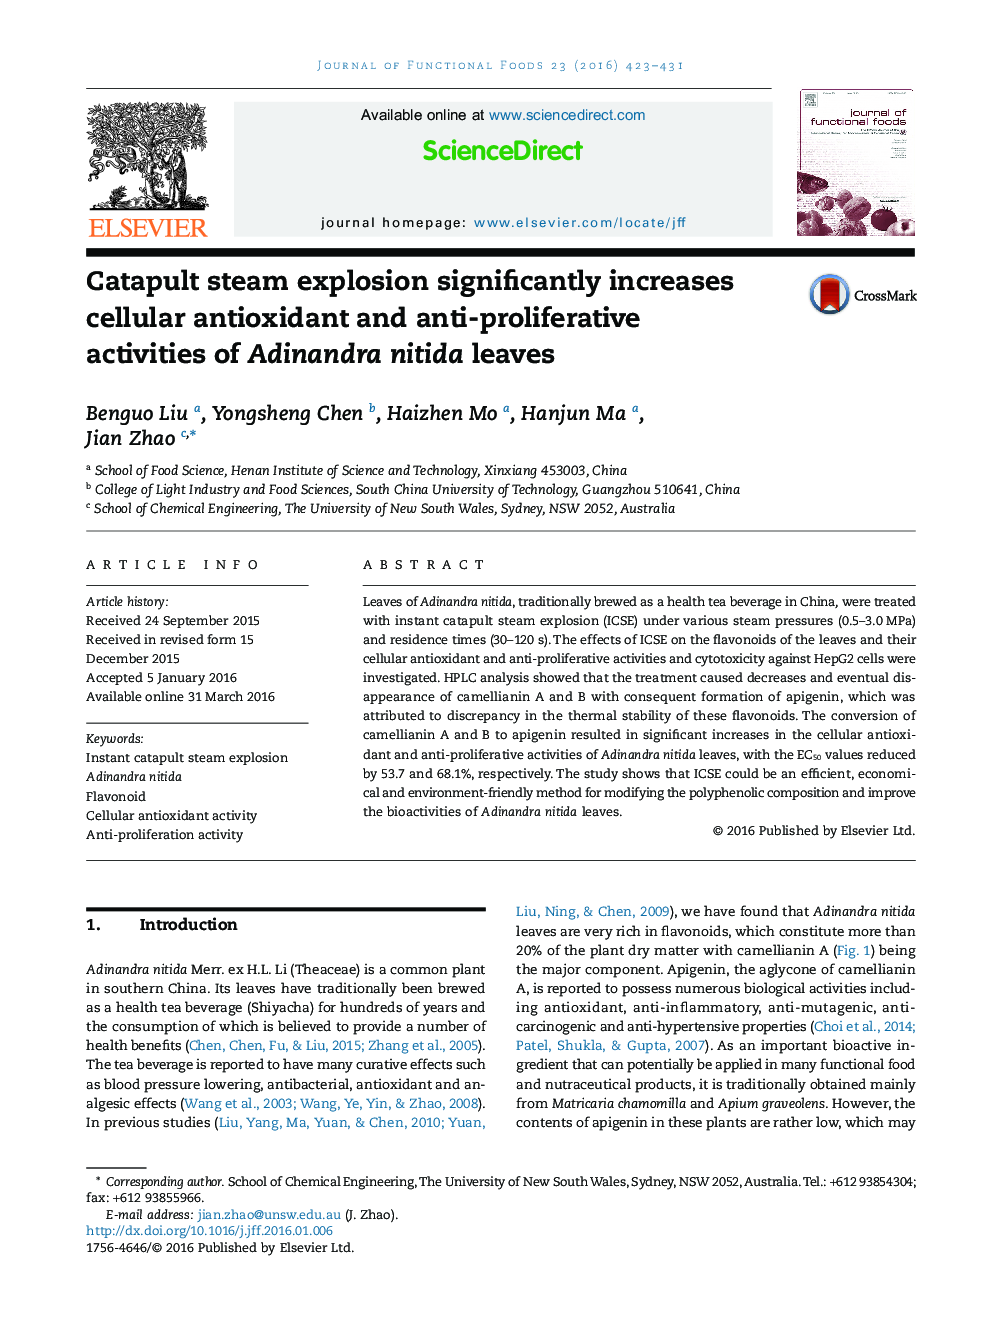 Catapult steam explosion significantly increases cellular antioxidant and anti-proliferative activities of Adinandra nitida leaves